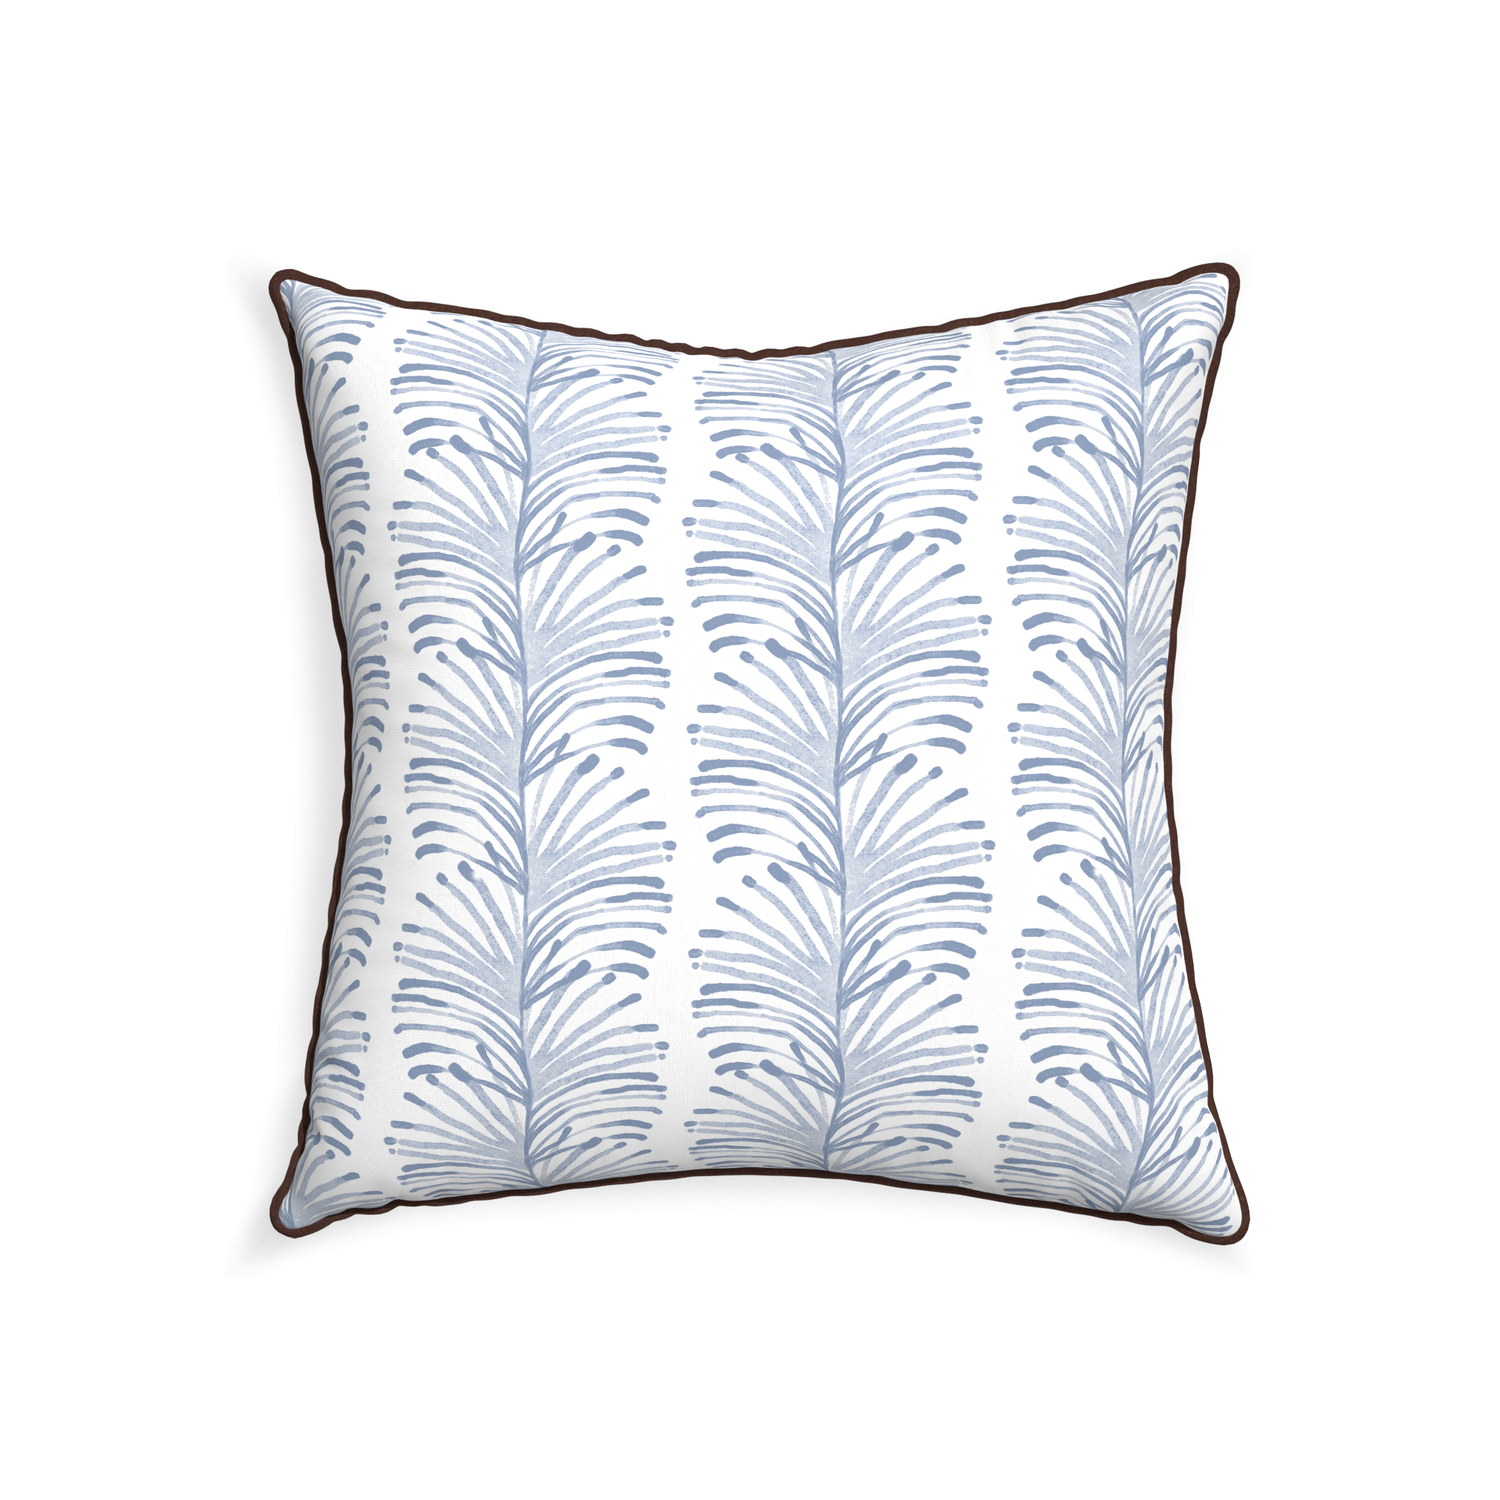 22-square emma sky custom sky blue botanical stripepillow with w piping on white background